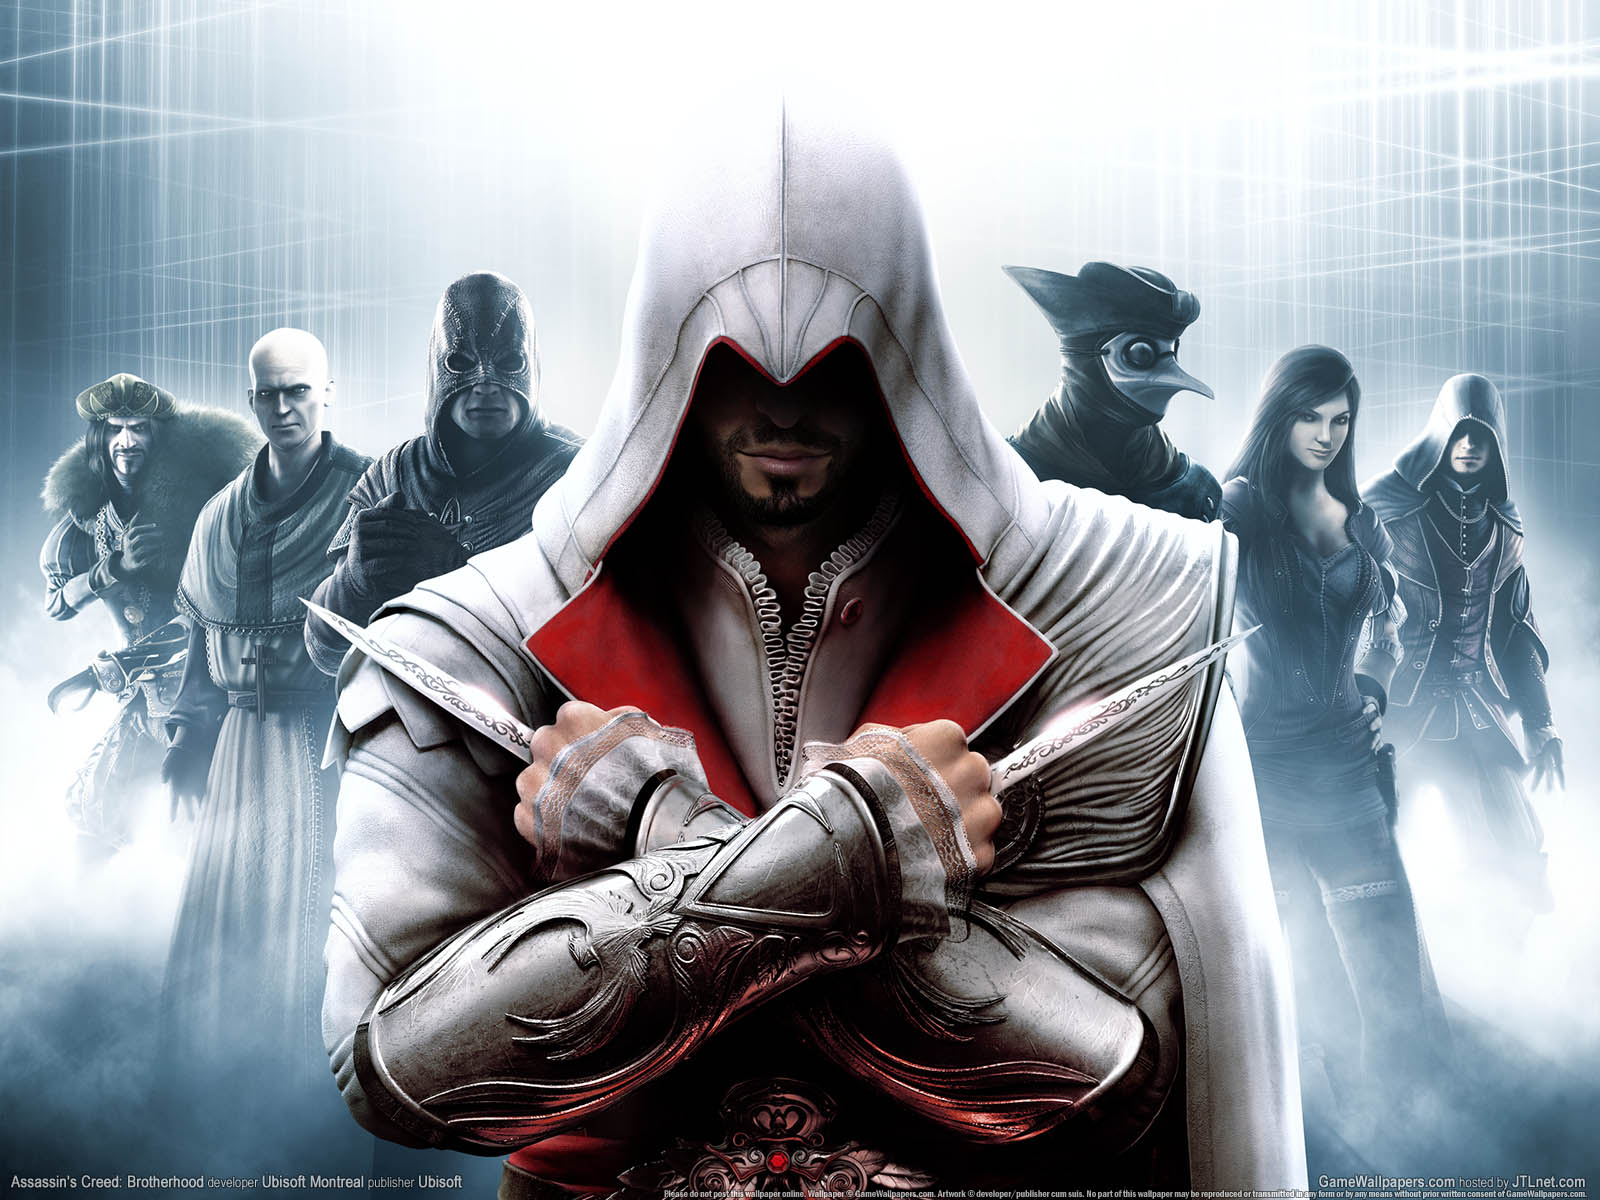 Assassin%5C%27s Creed%3A Brotherhood achtergrond 04 1600x1200